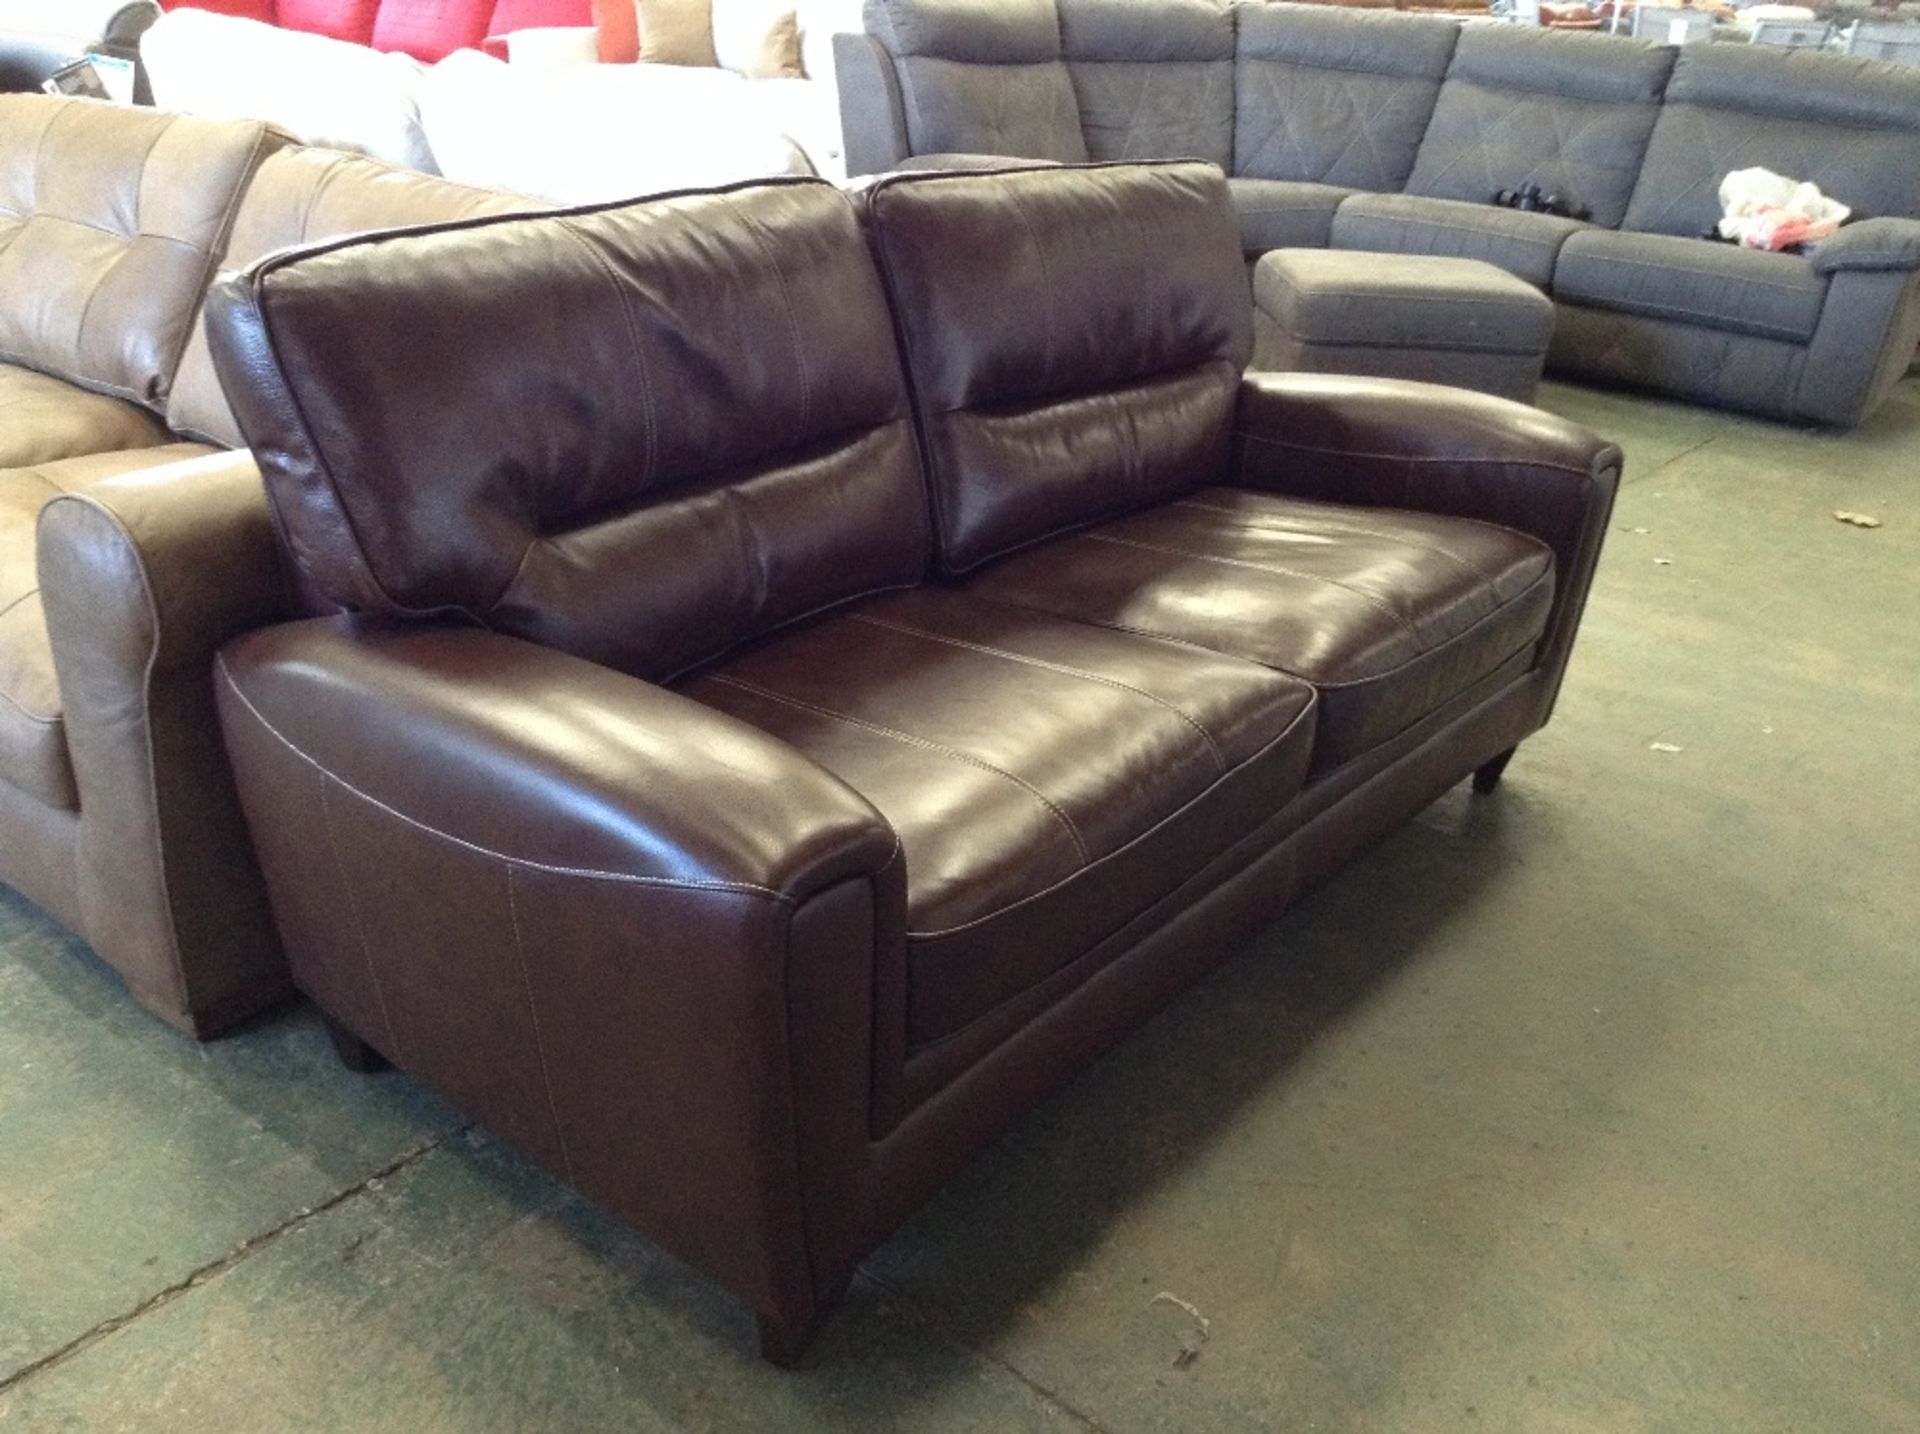 BROWN LEATHER WITH WHITE STITCHING 3 SEATER SOFA (